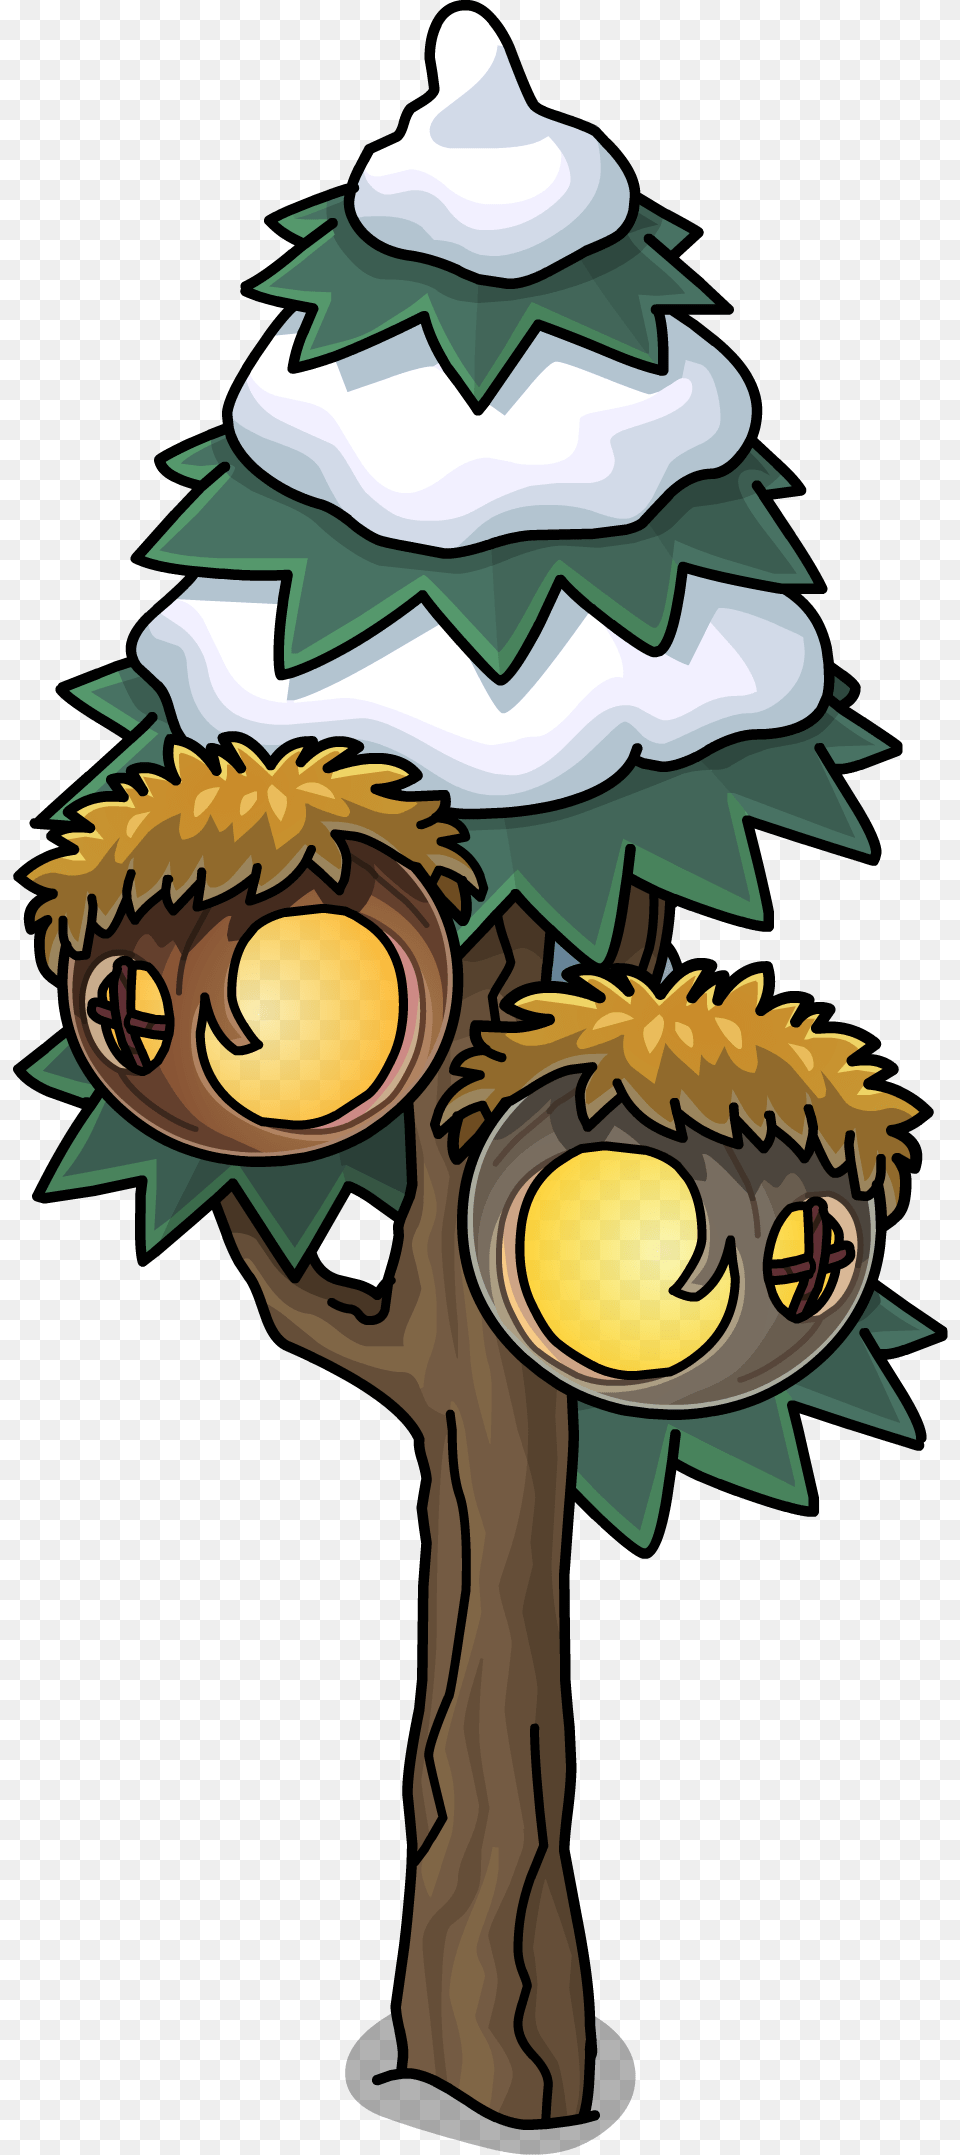 Wilds Puffle Treehouse In Game Cartoon, Cross, Symbol, Festival Png Image